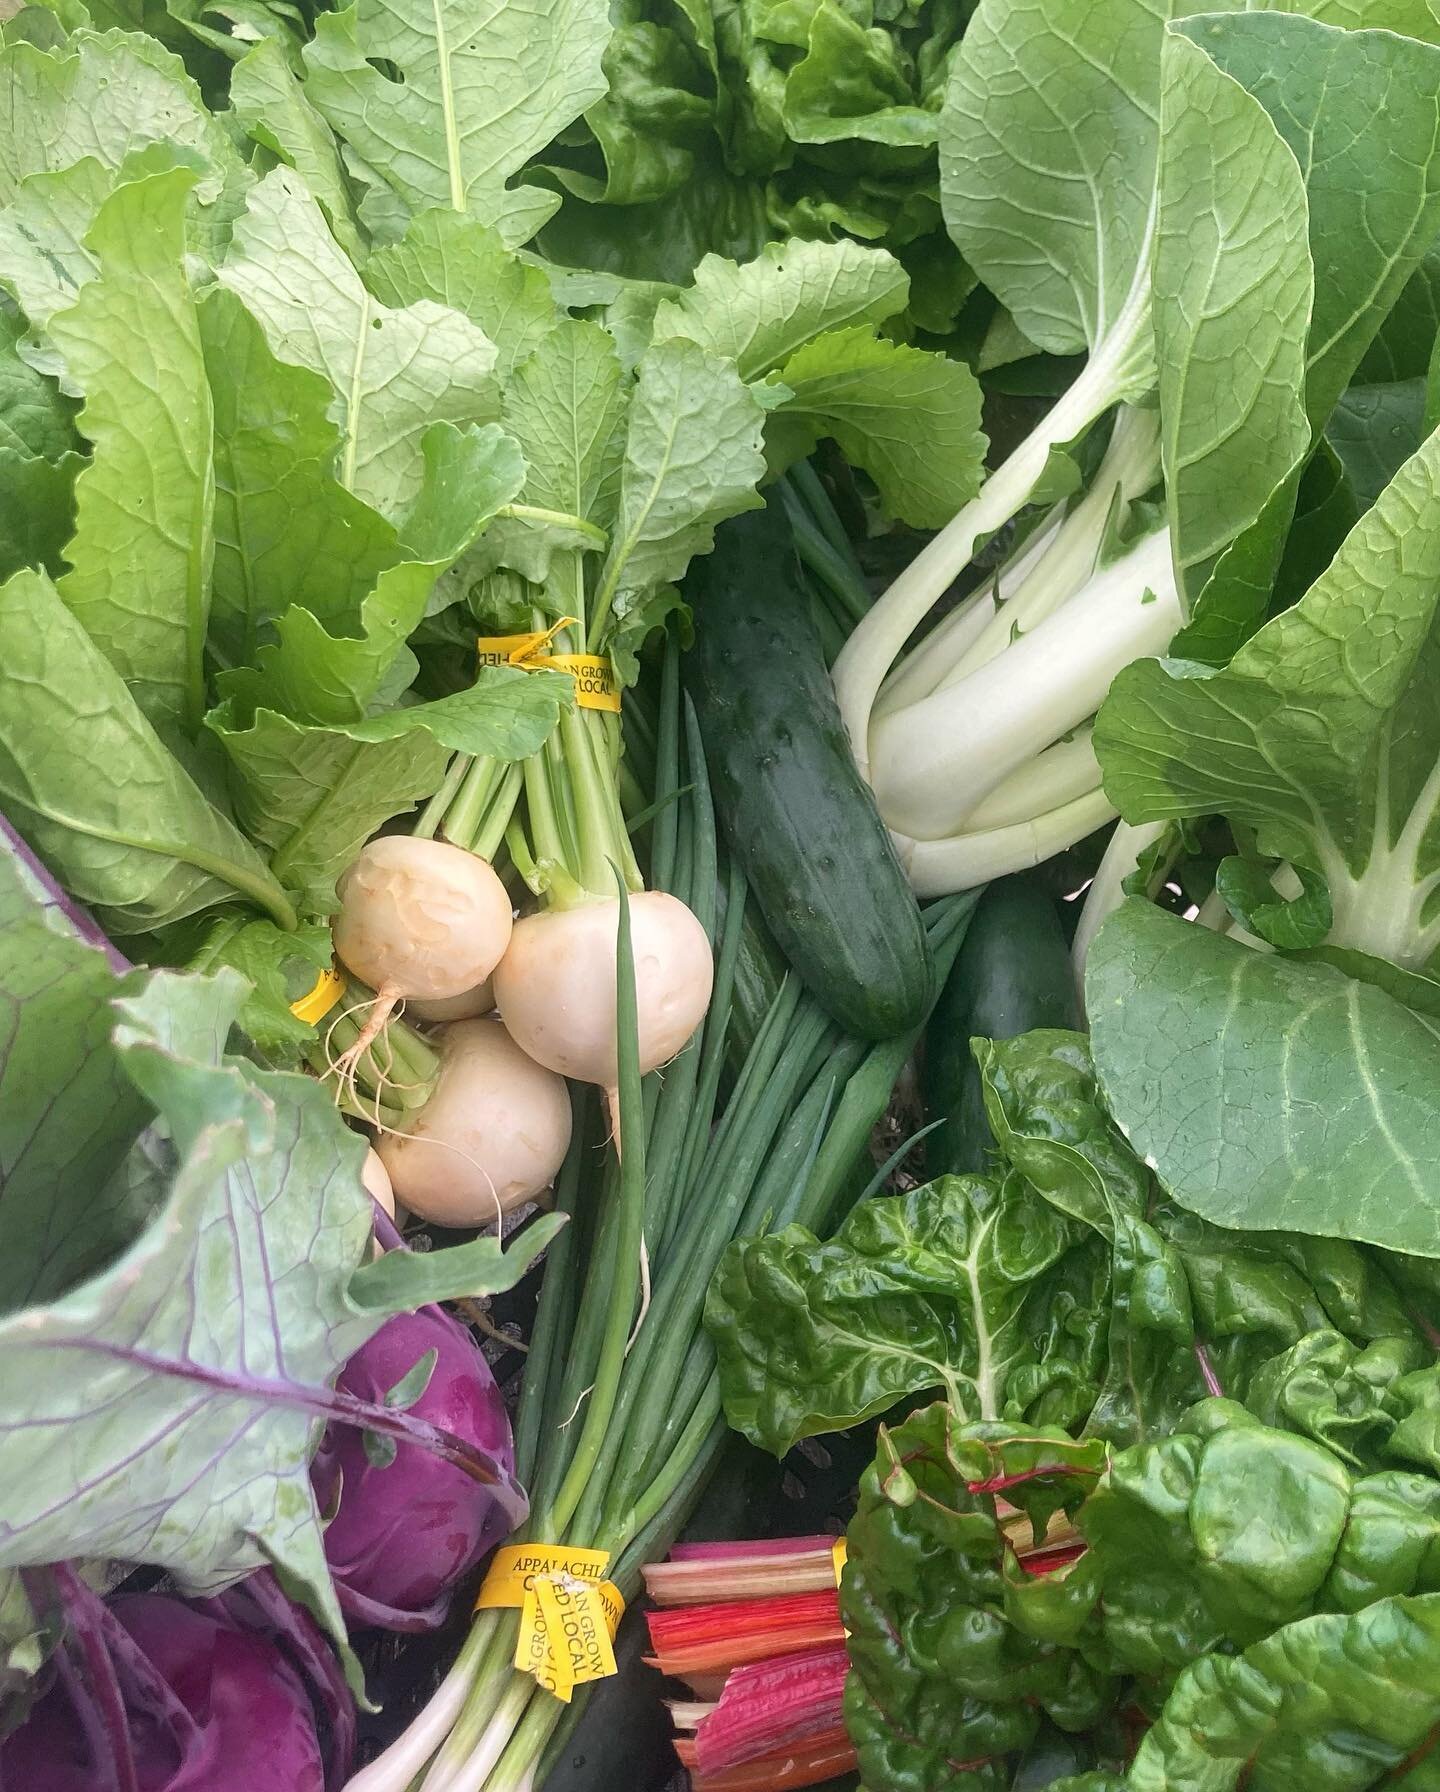 Several shares still available for the summer CSA season, running May through November! Purchase a farm share and receive a weekly box of seasonal, fresh, organically grown produce of the highest quality. Boxes will be available for pick up at the fa